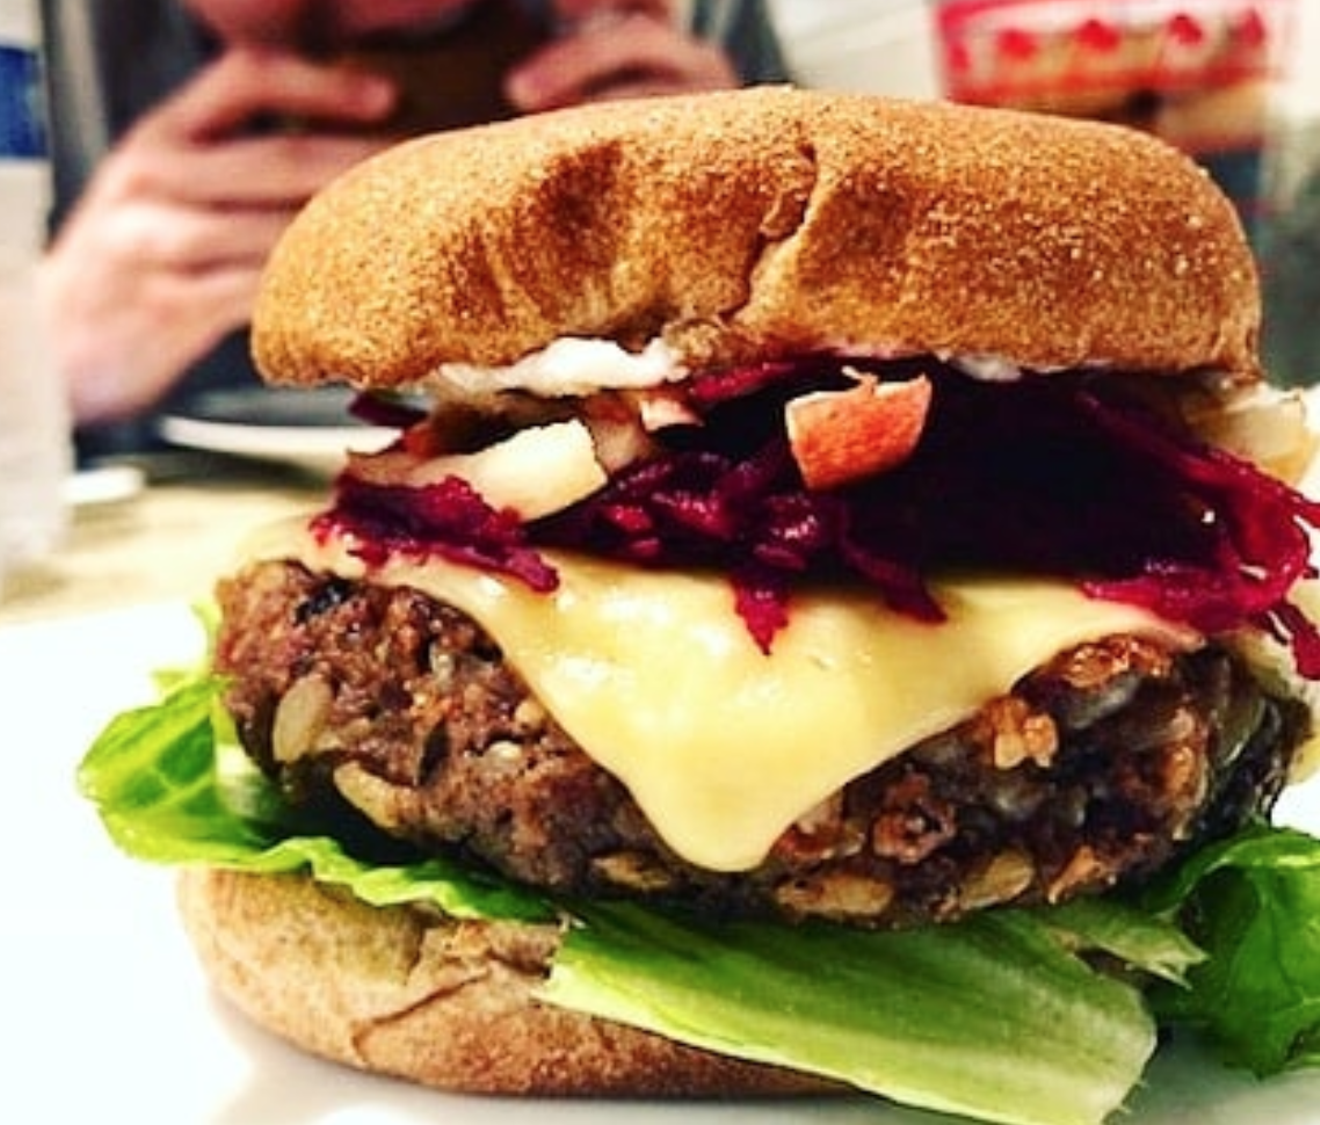 The Can't Beet This Burger is made with apples, grated beets, garlic basil aioli and vegan smoked gouda.